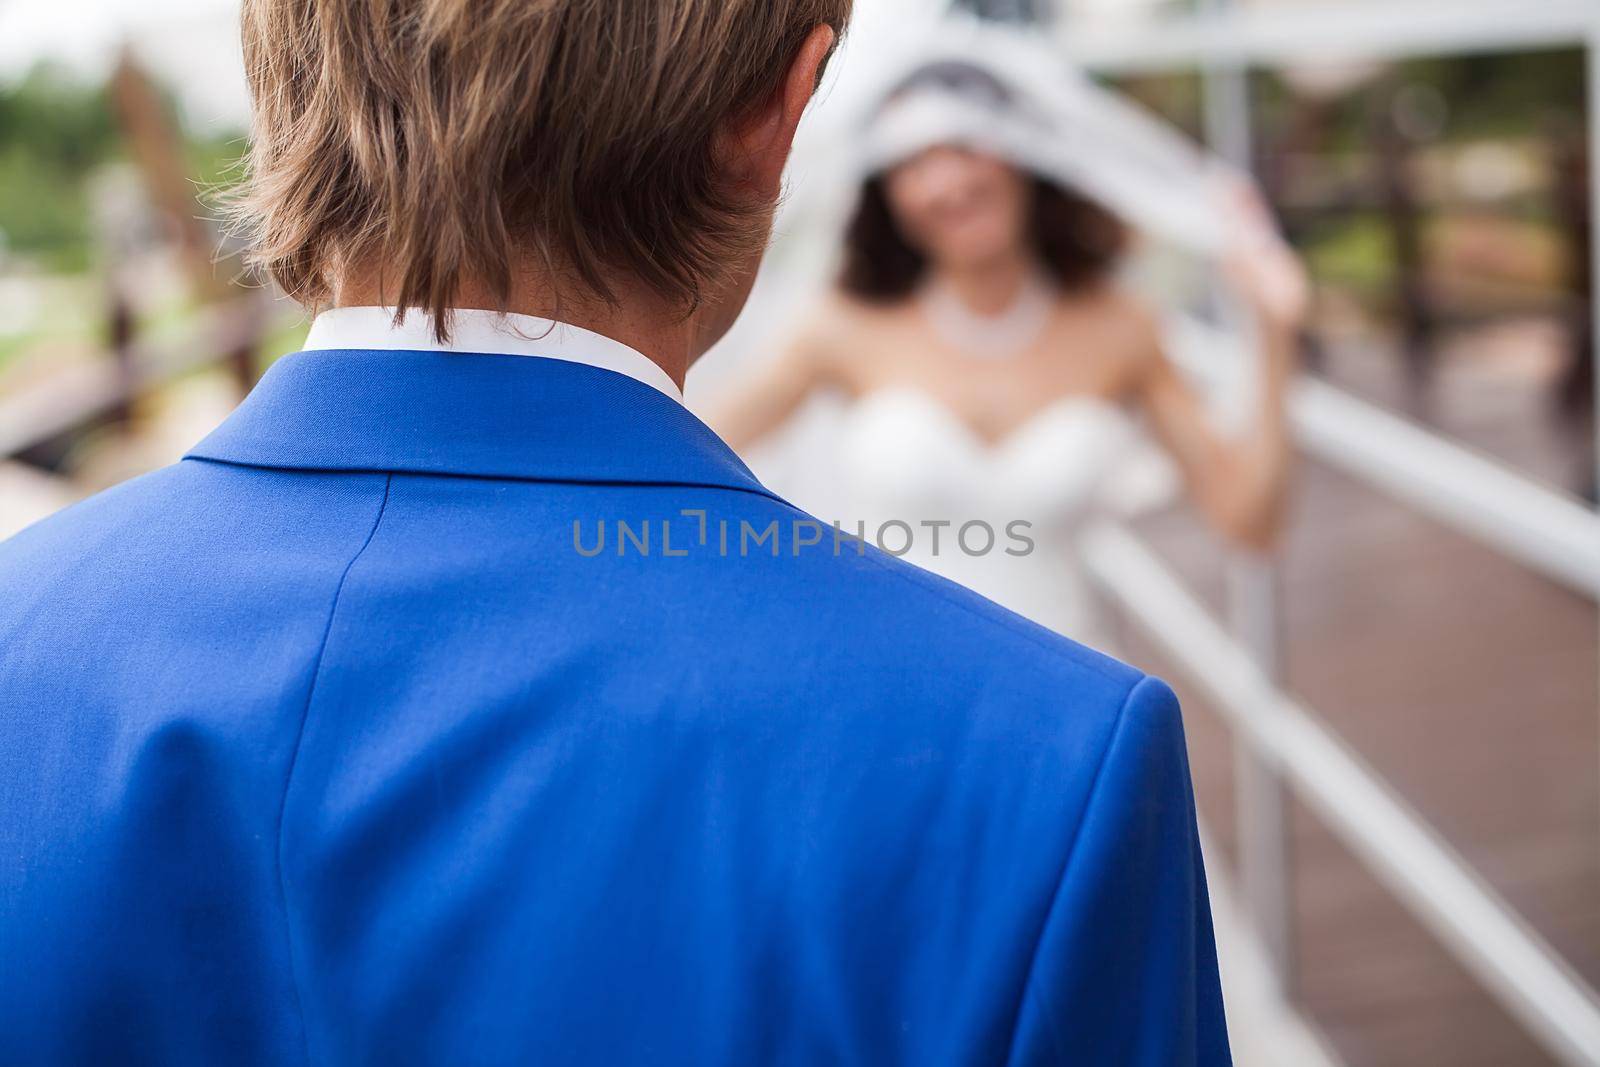 The first meeting of the bride and groom on the wedding day. Emotions newlyweds before the wedding ceremony. Bride and groom look at each other by StudioPeace